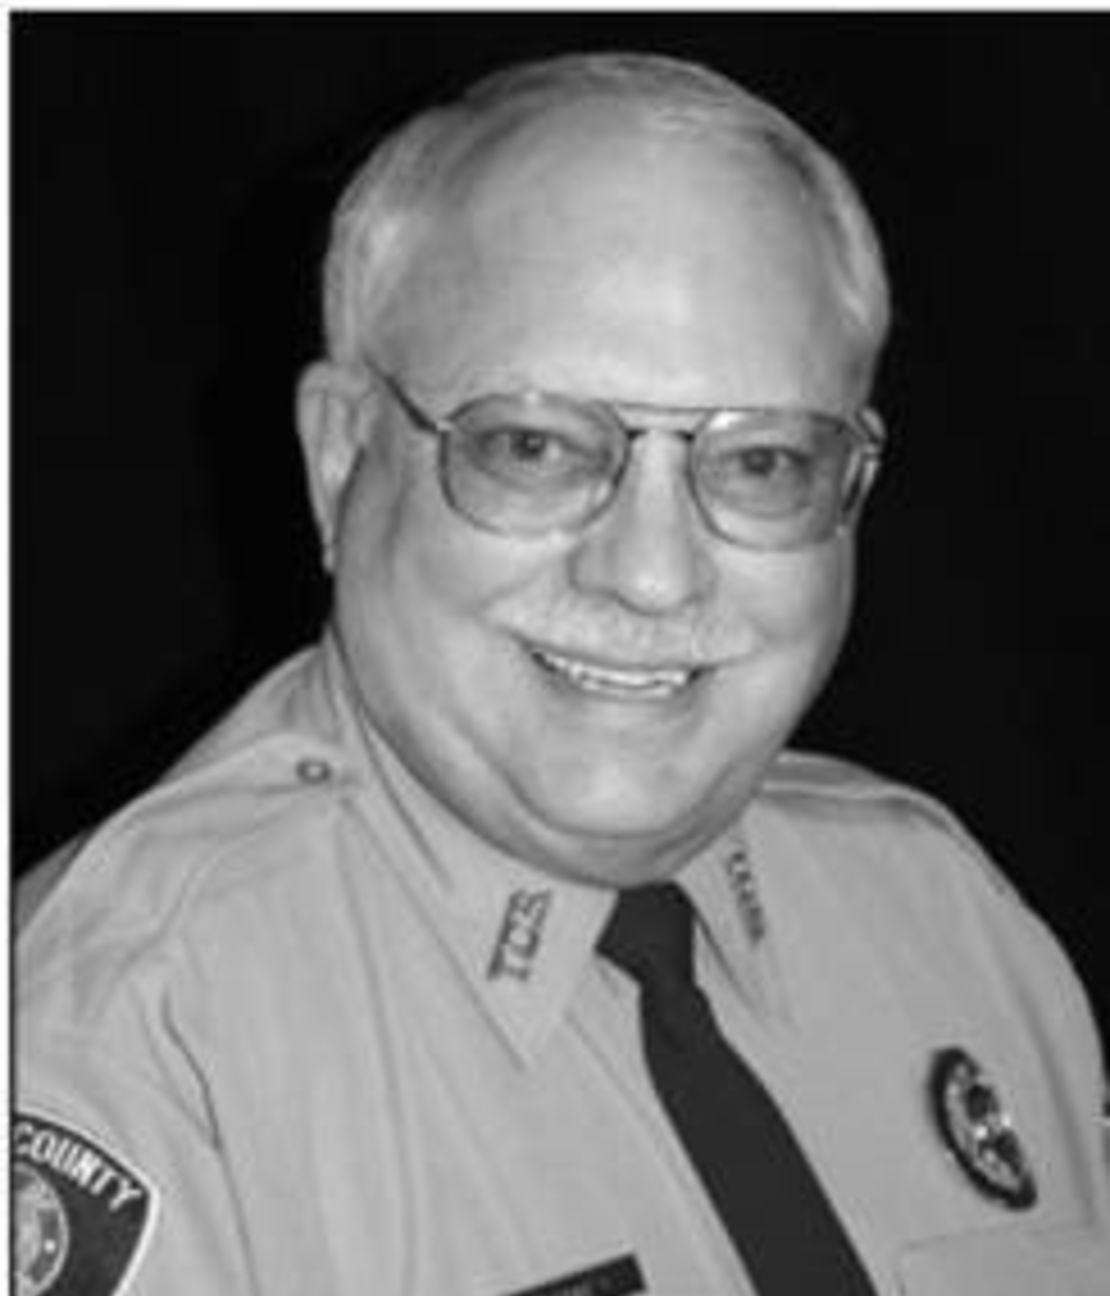 Reserve Officer Robert (Bob) Bates "inadvertently" fired gun in shooting 